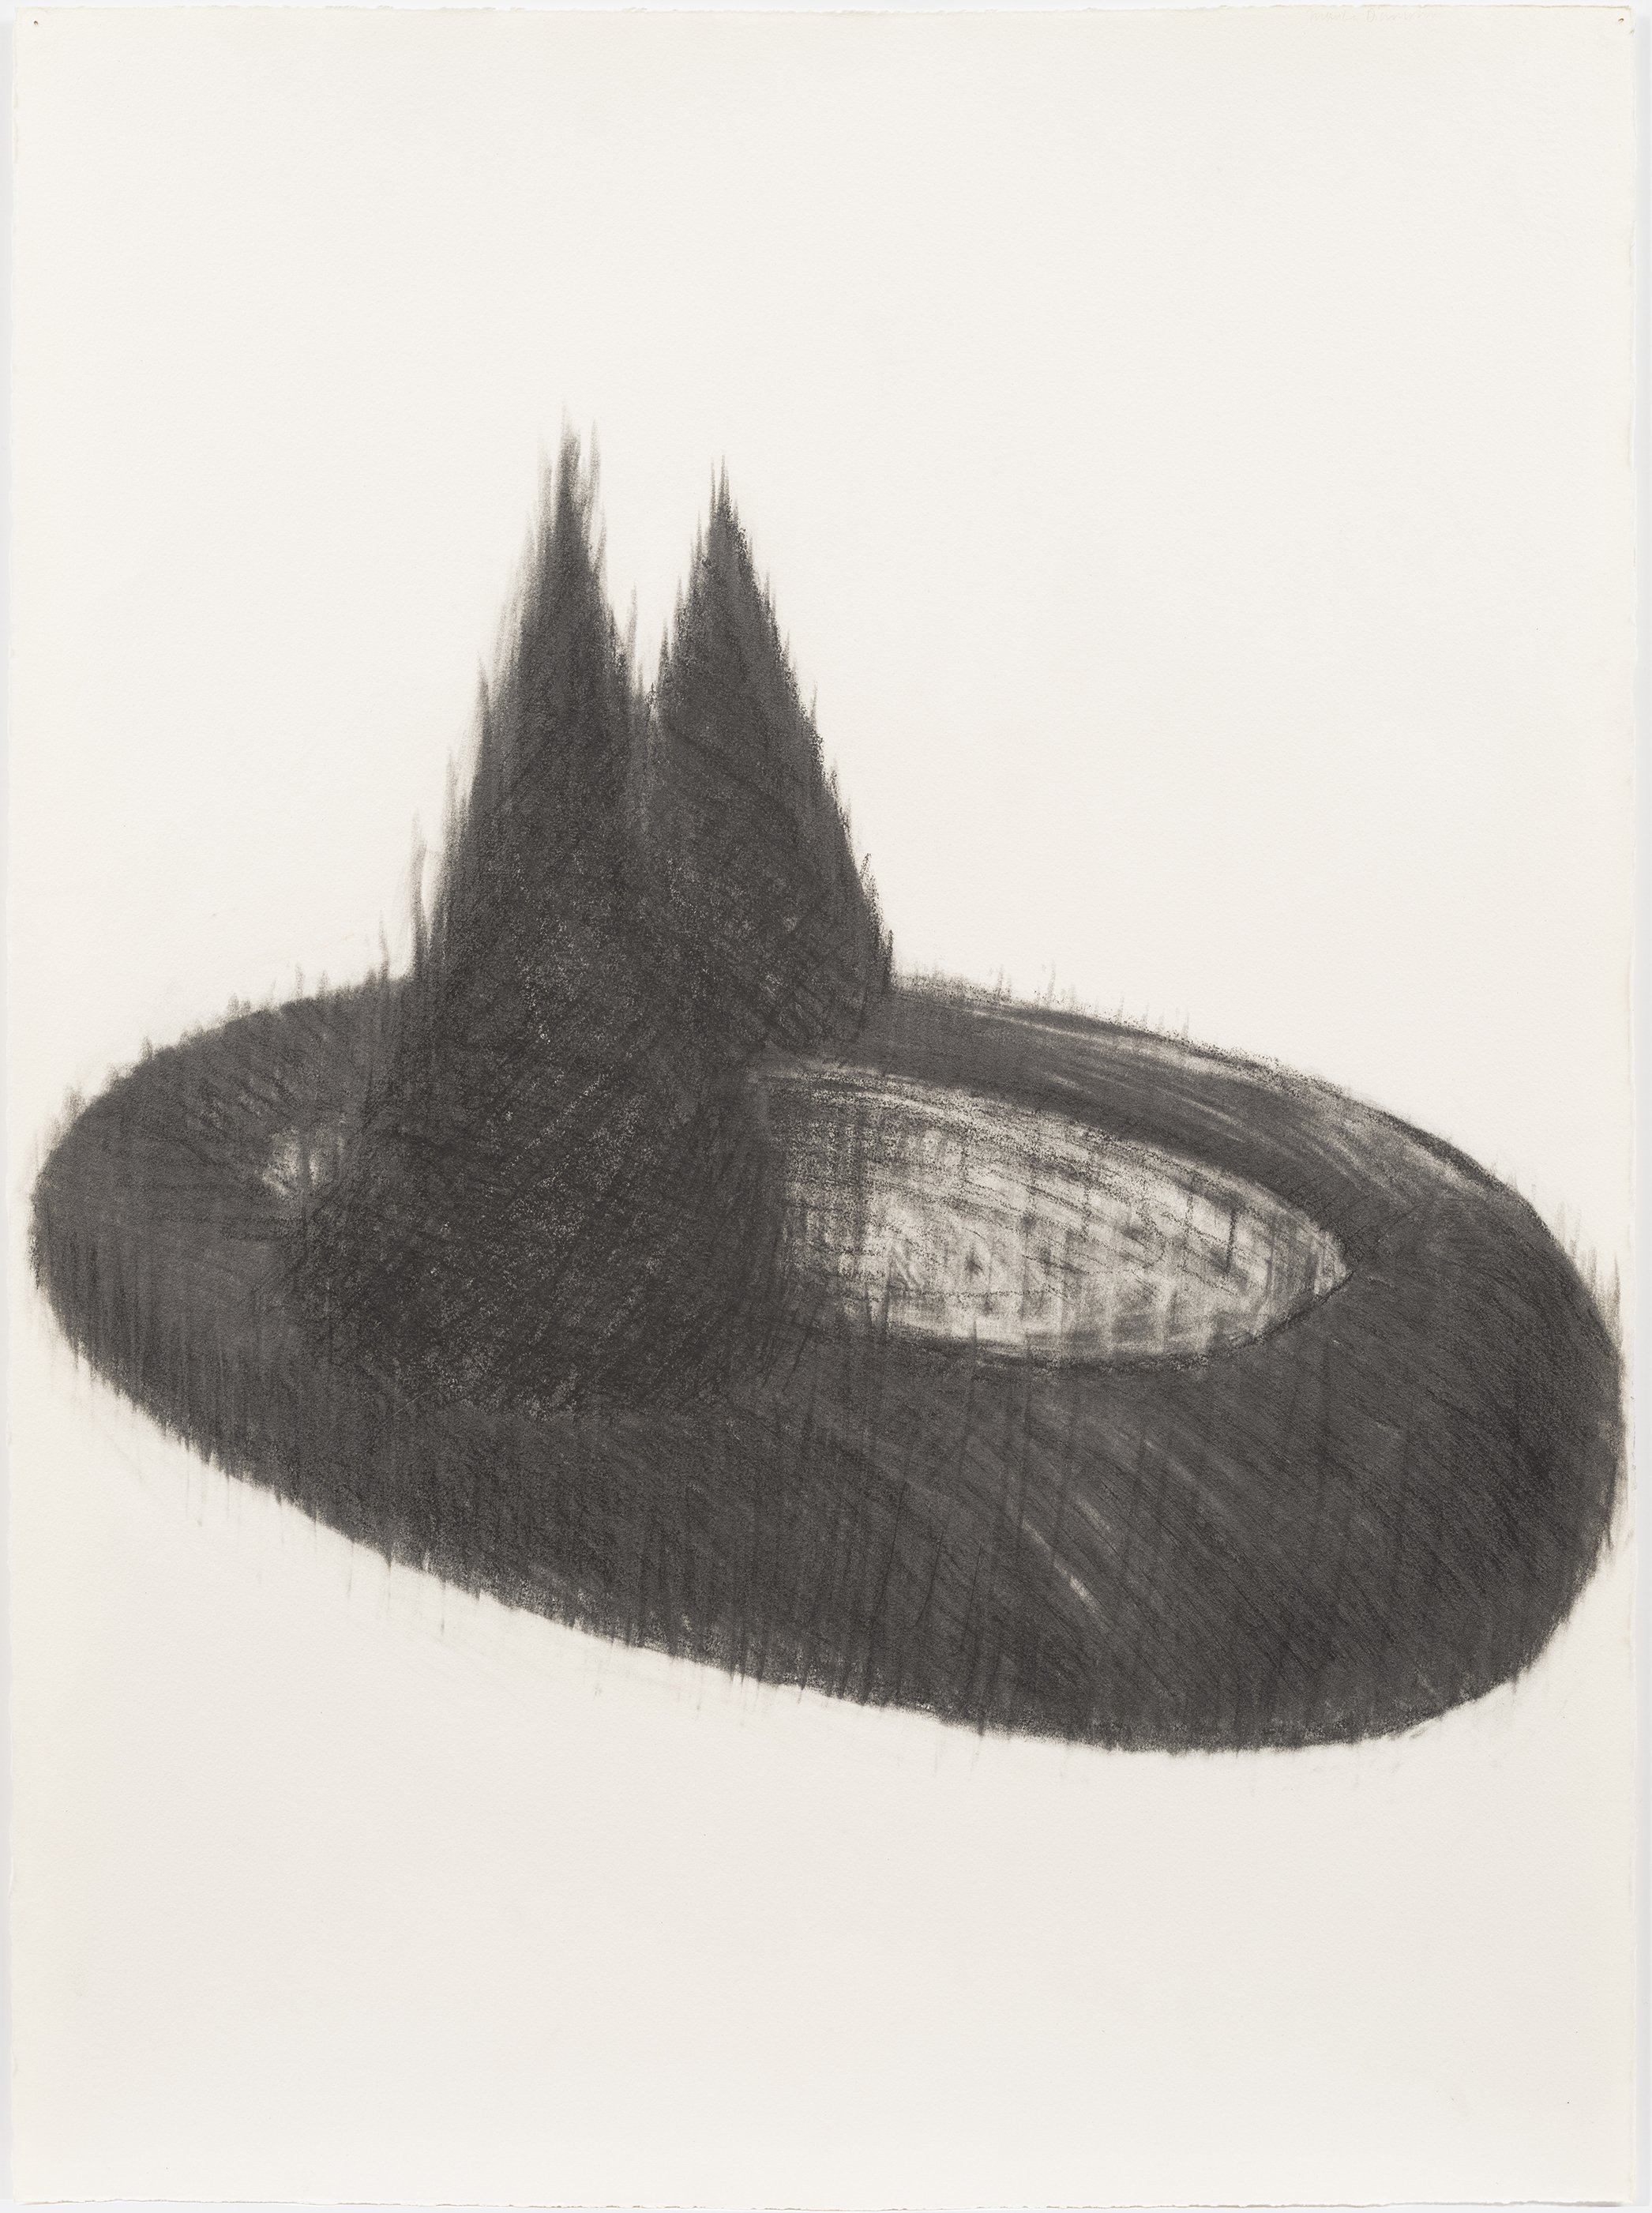   Untitled (Pool) , c. 1970s. Graphite on paper. 29.75 x 22 in. 